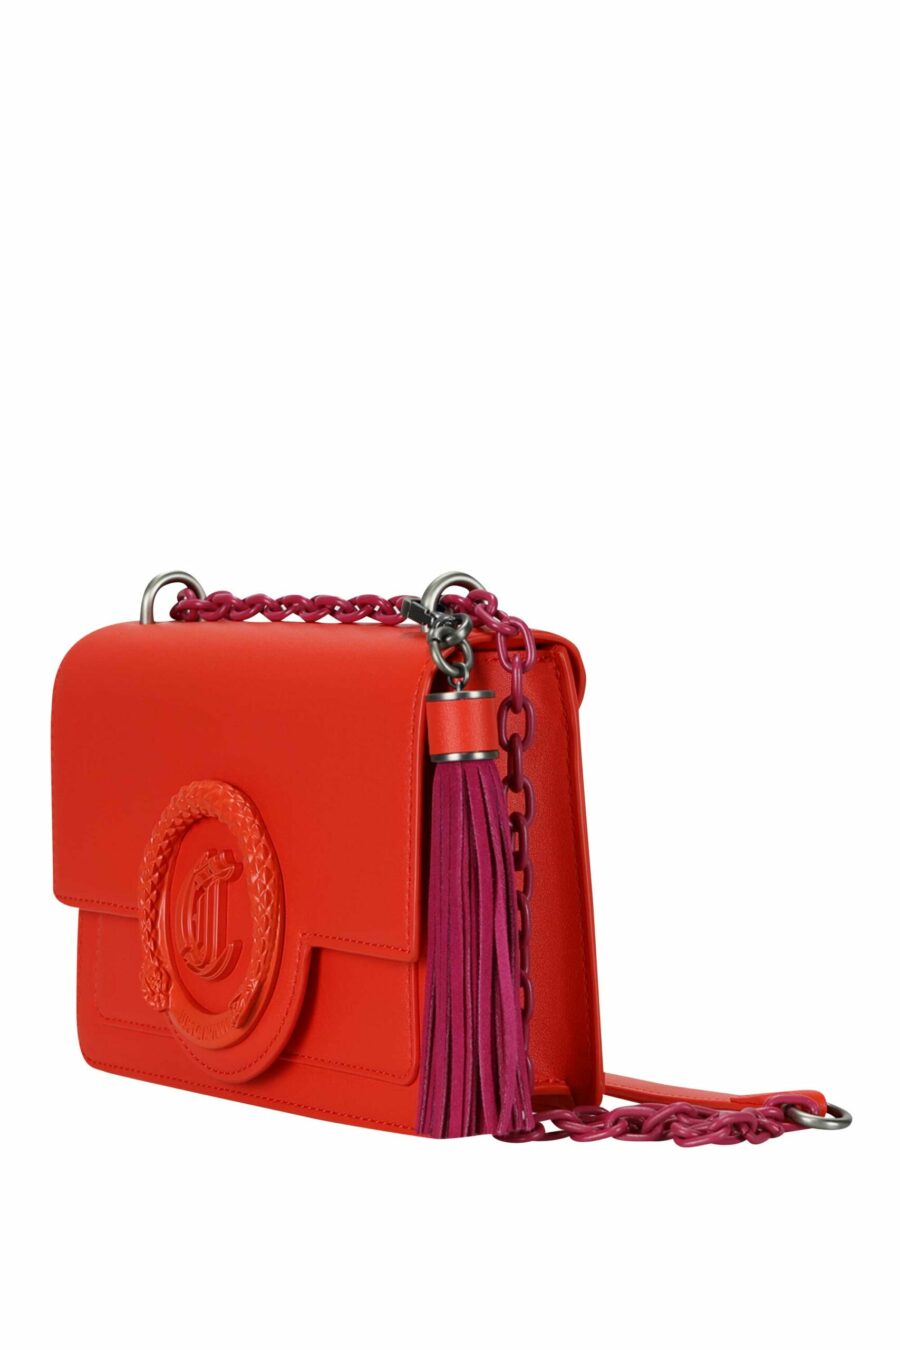 Coral coloured shoulder bag with chain and monochrome circular "c" logo - 8052672642684 1 scaled